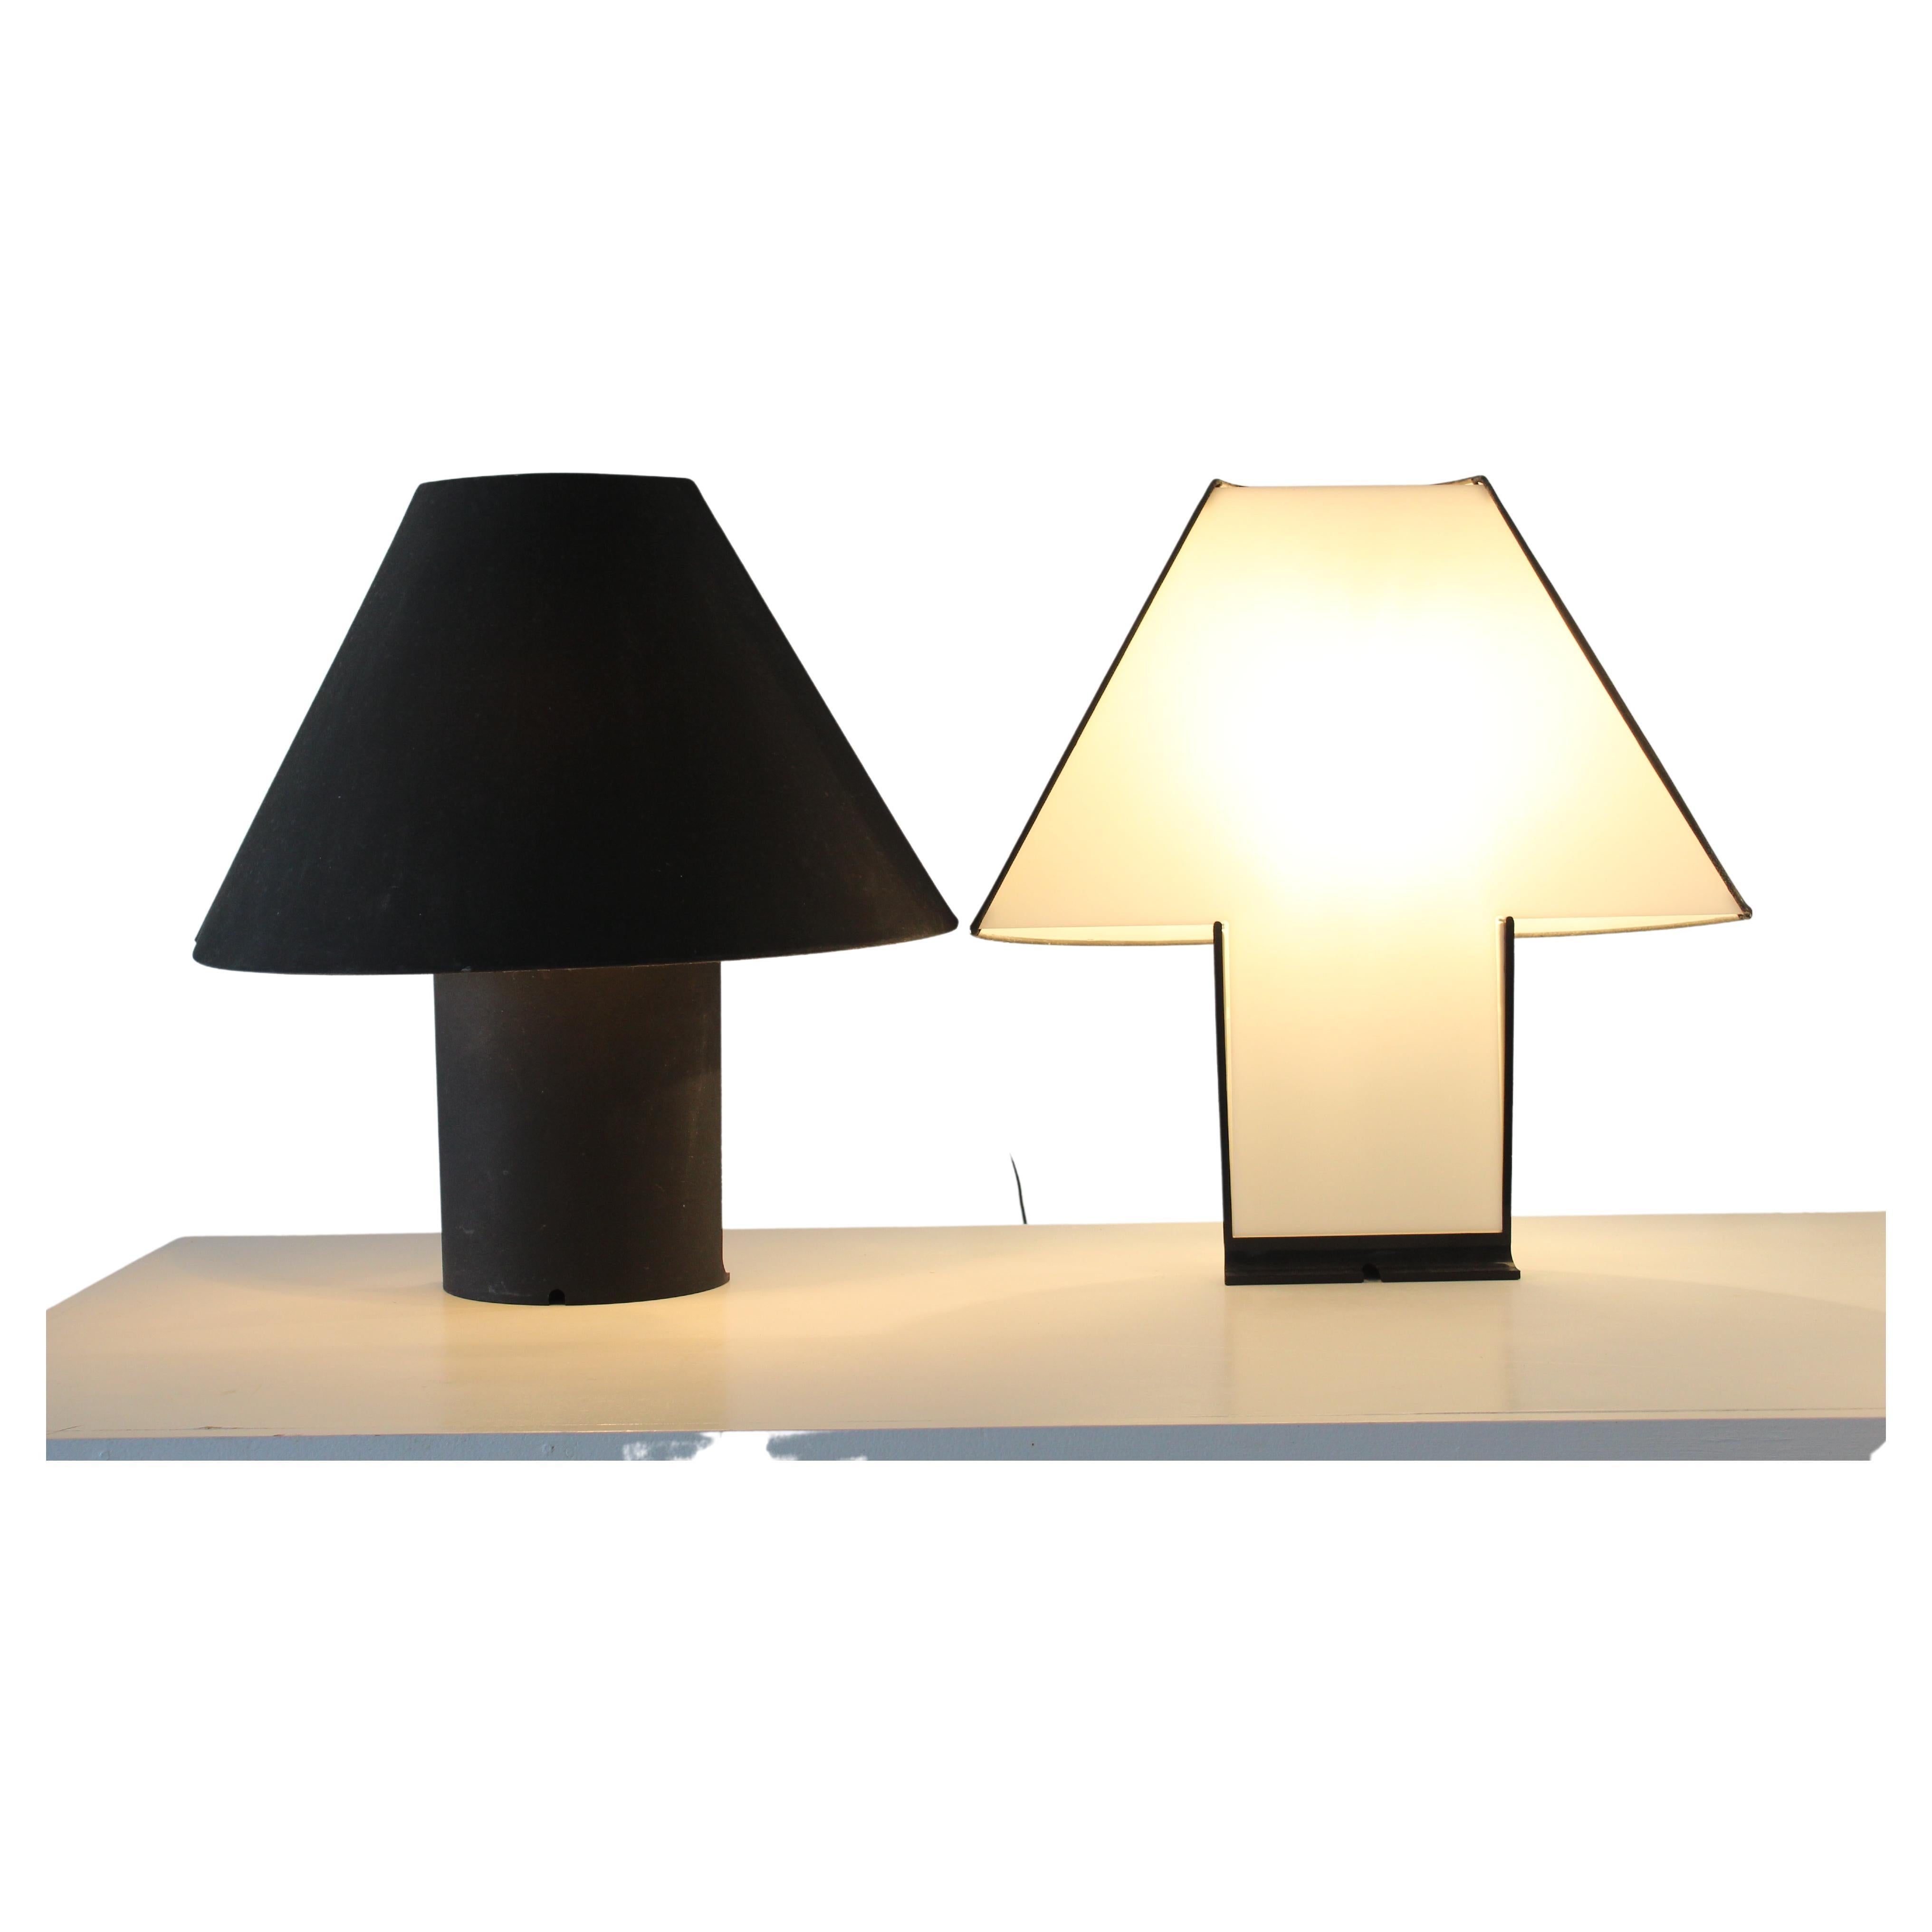 Mario Barbaglia & Marco Colombo for Paf Studio Table Lamps - Set of 2